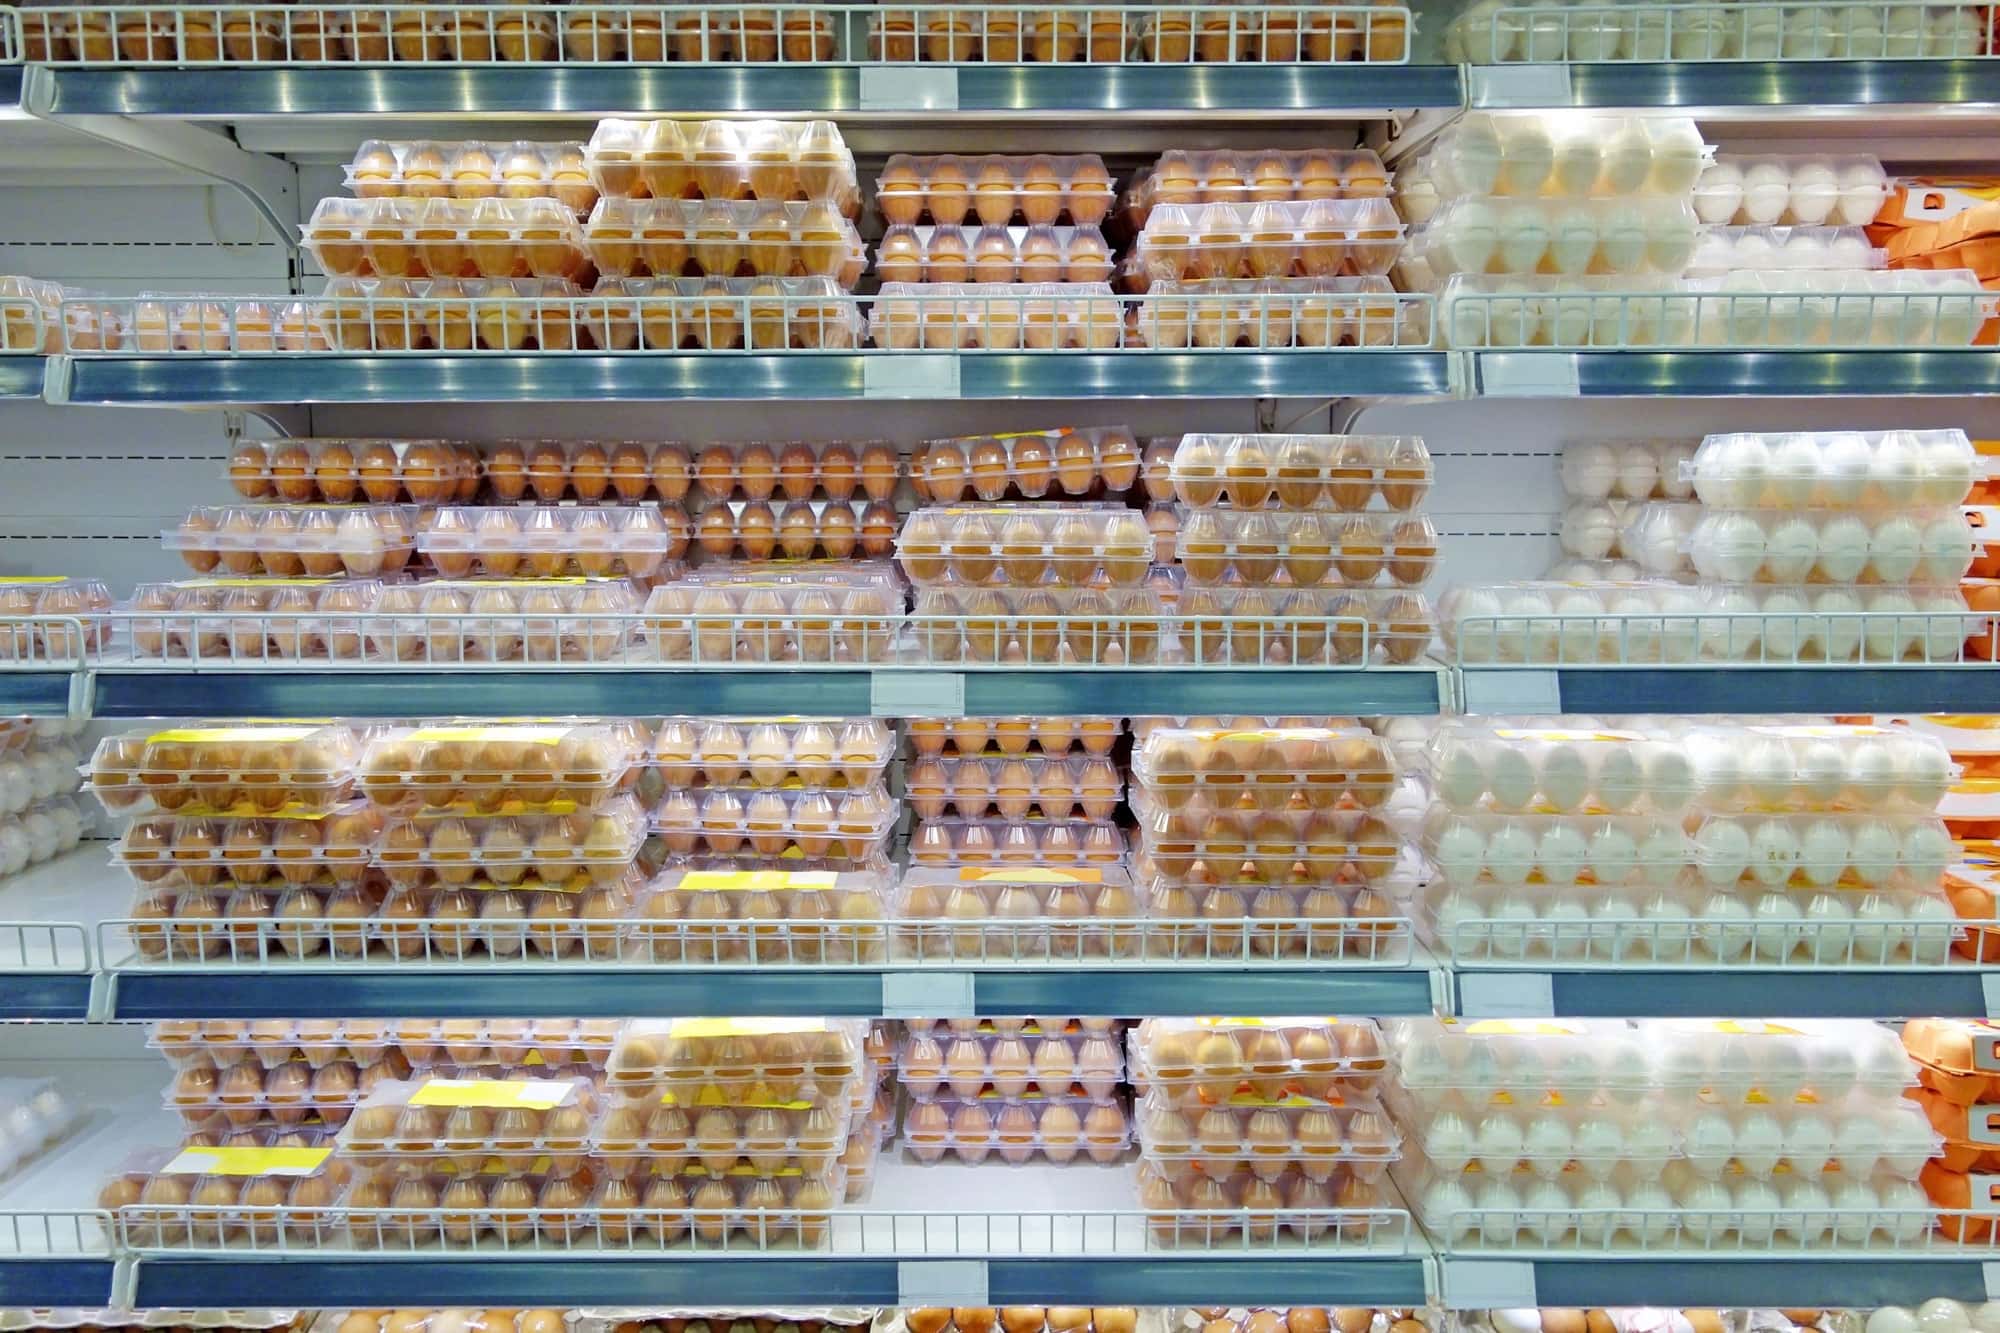 lots of eggs in plastic cartons in a refrigerated display in a grocery store